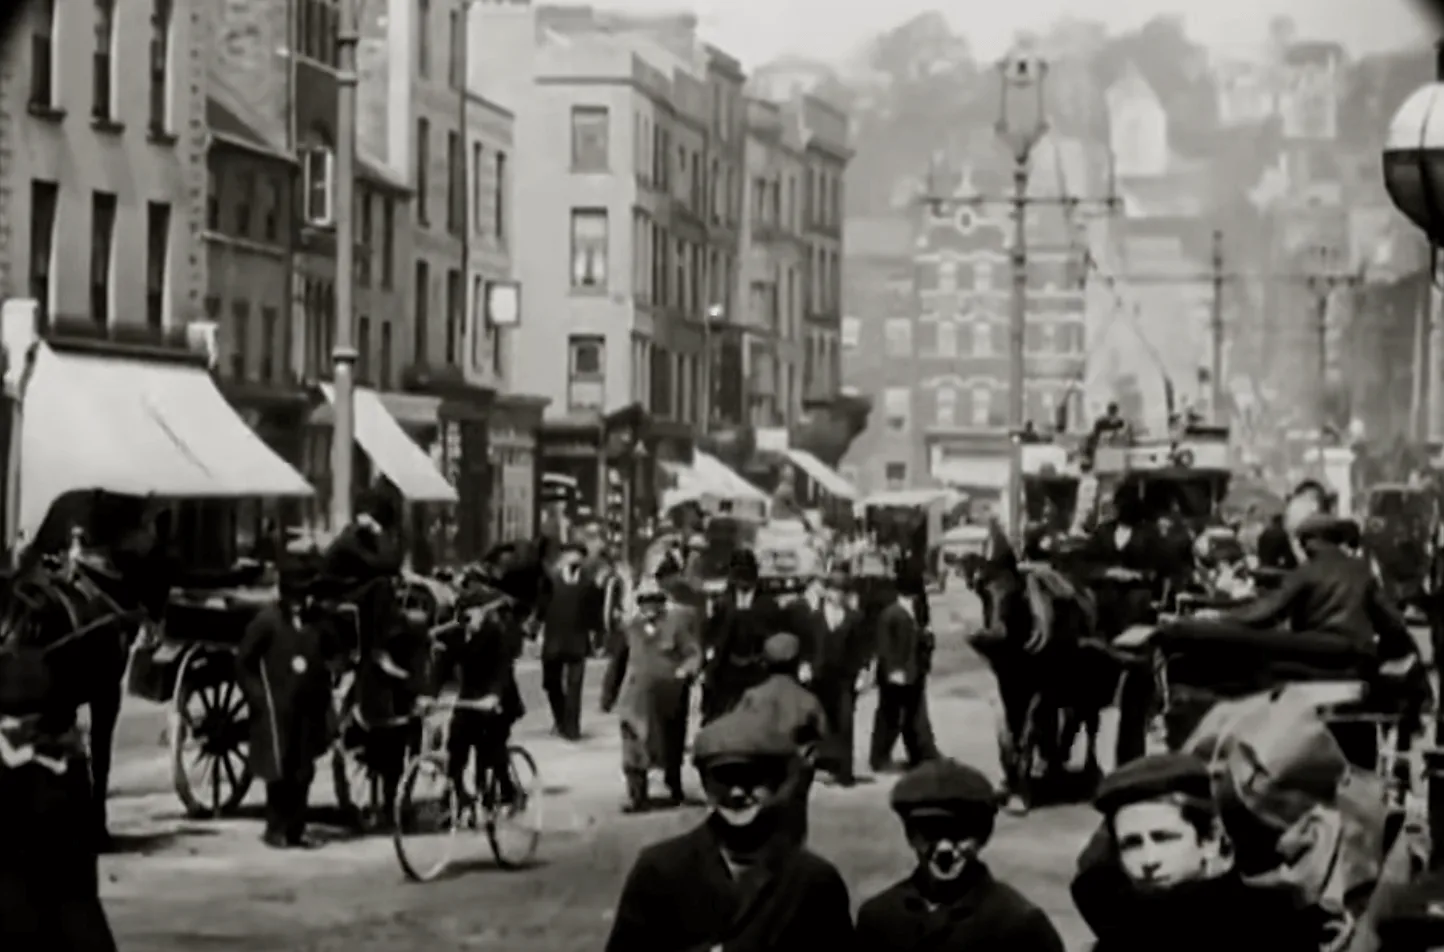 Screenshot from Co. Cork Ireland in 1902 on this very rare footage.